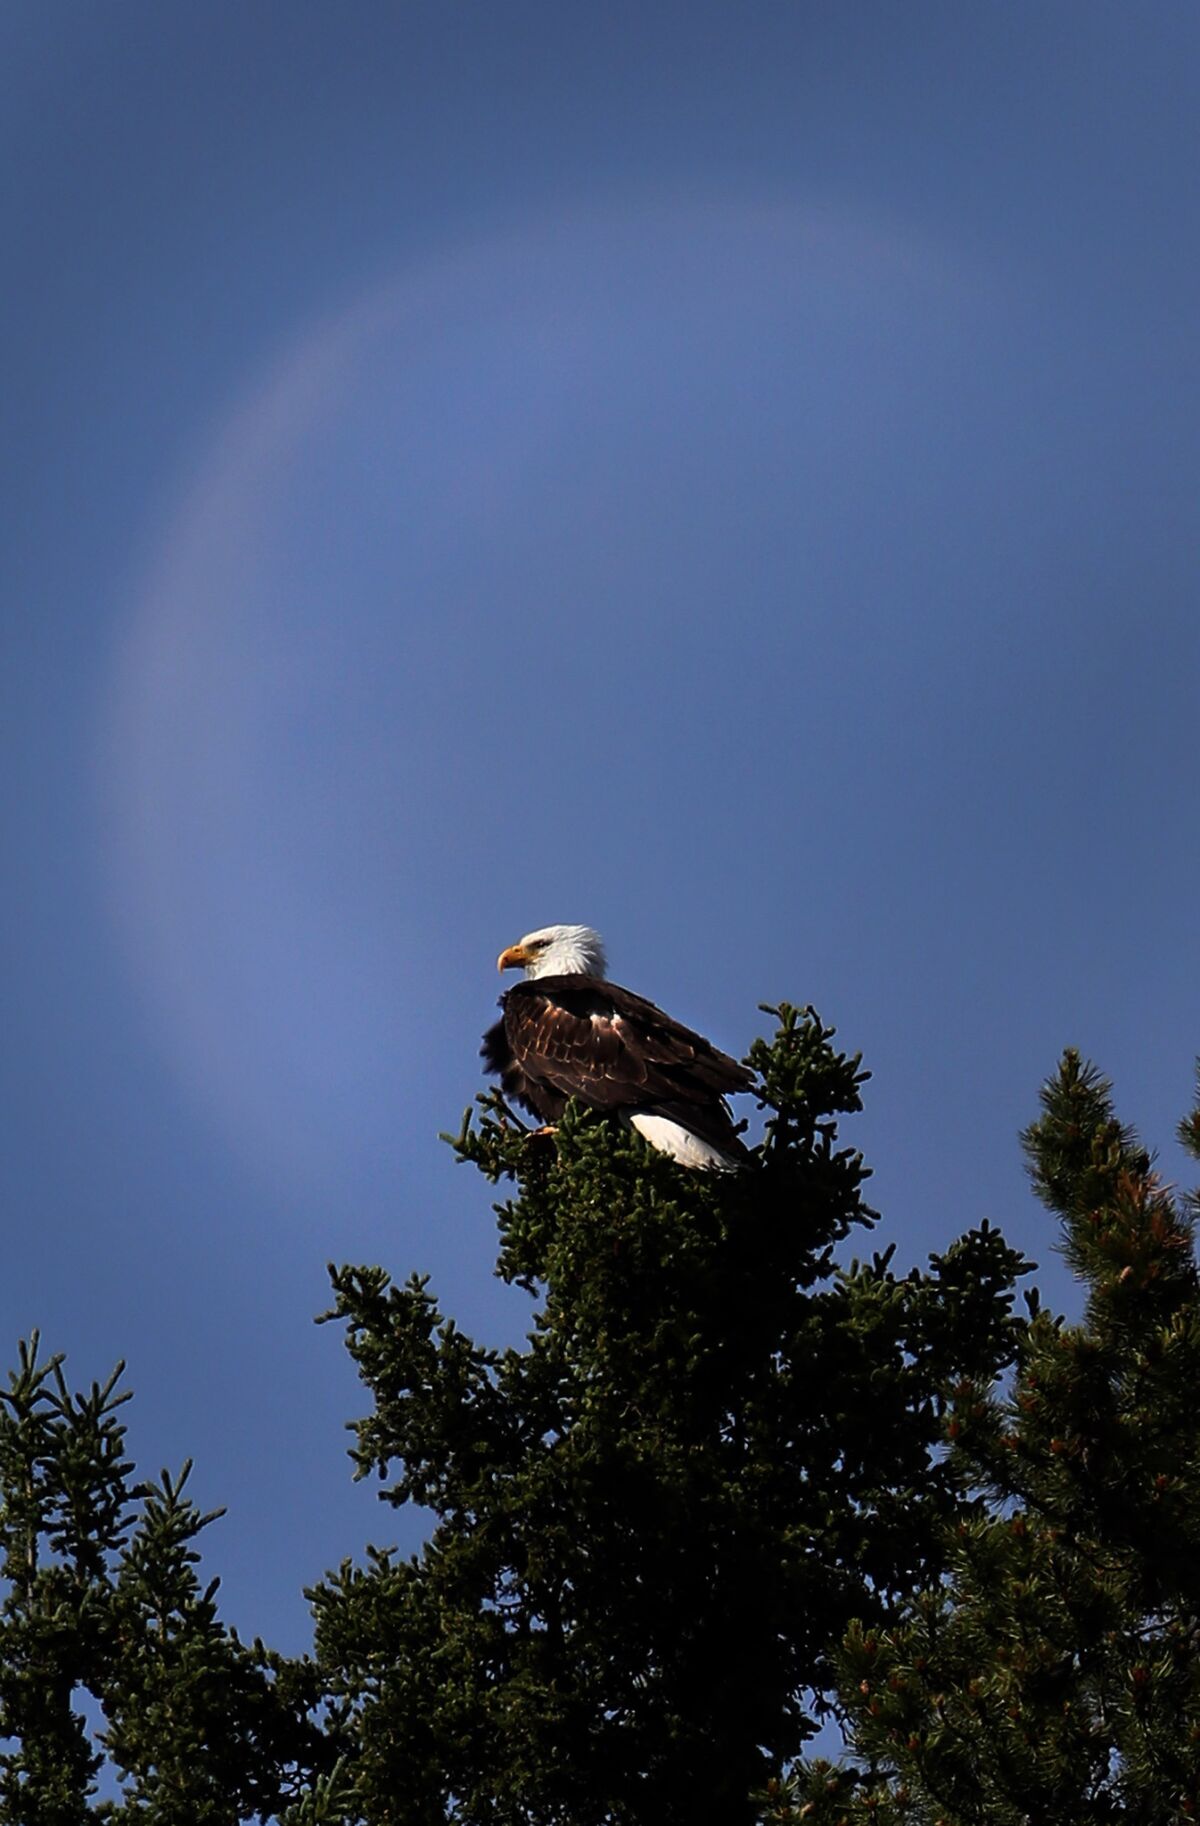 In Whitehorse, Canada, a Bald Eagle greets visitors from the tree tops on the road into town under a daytime moon.